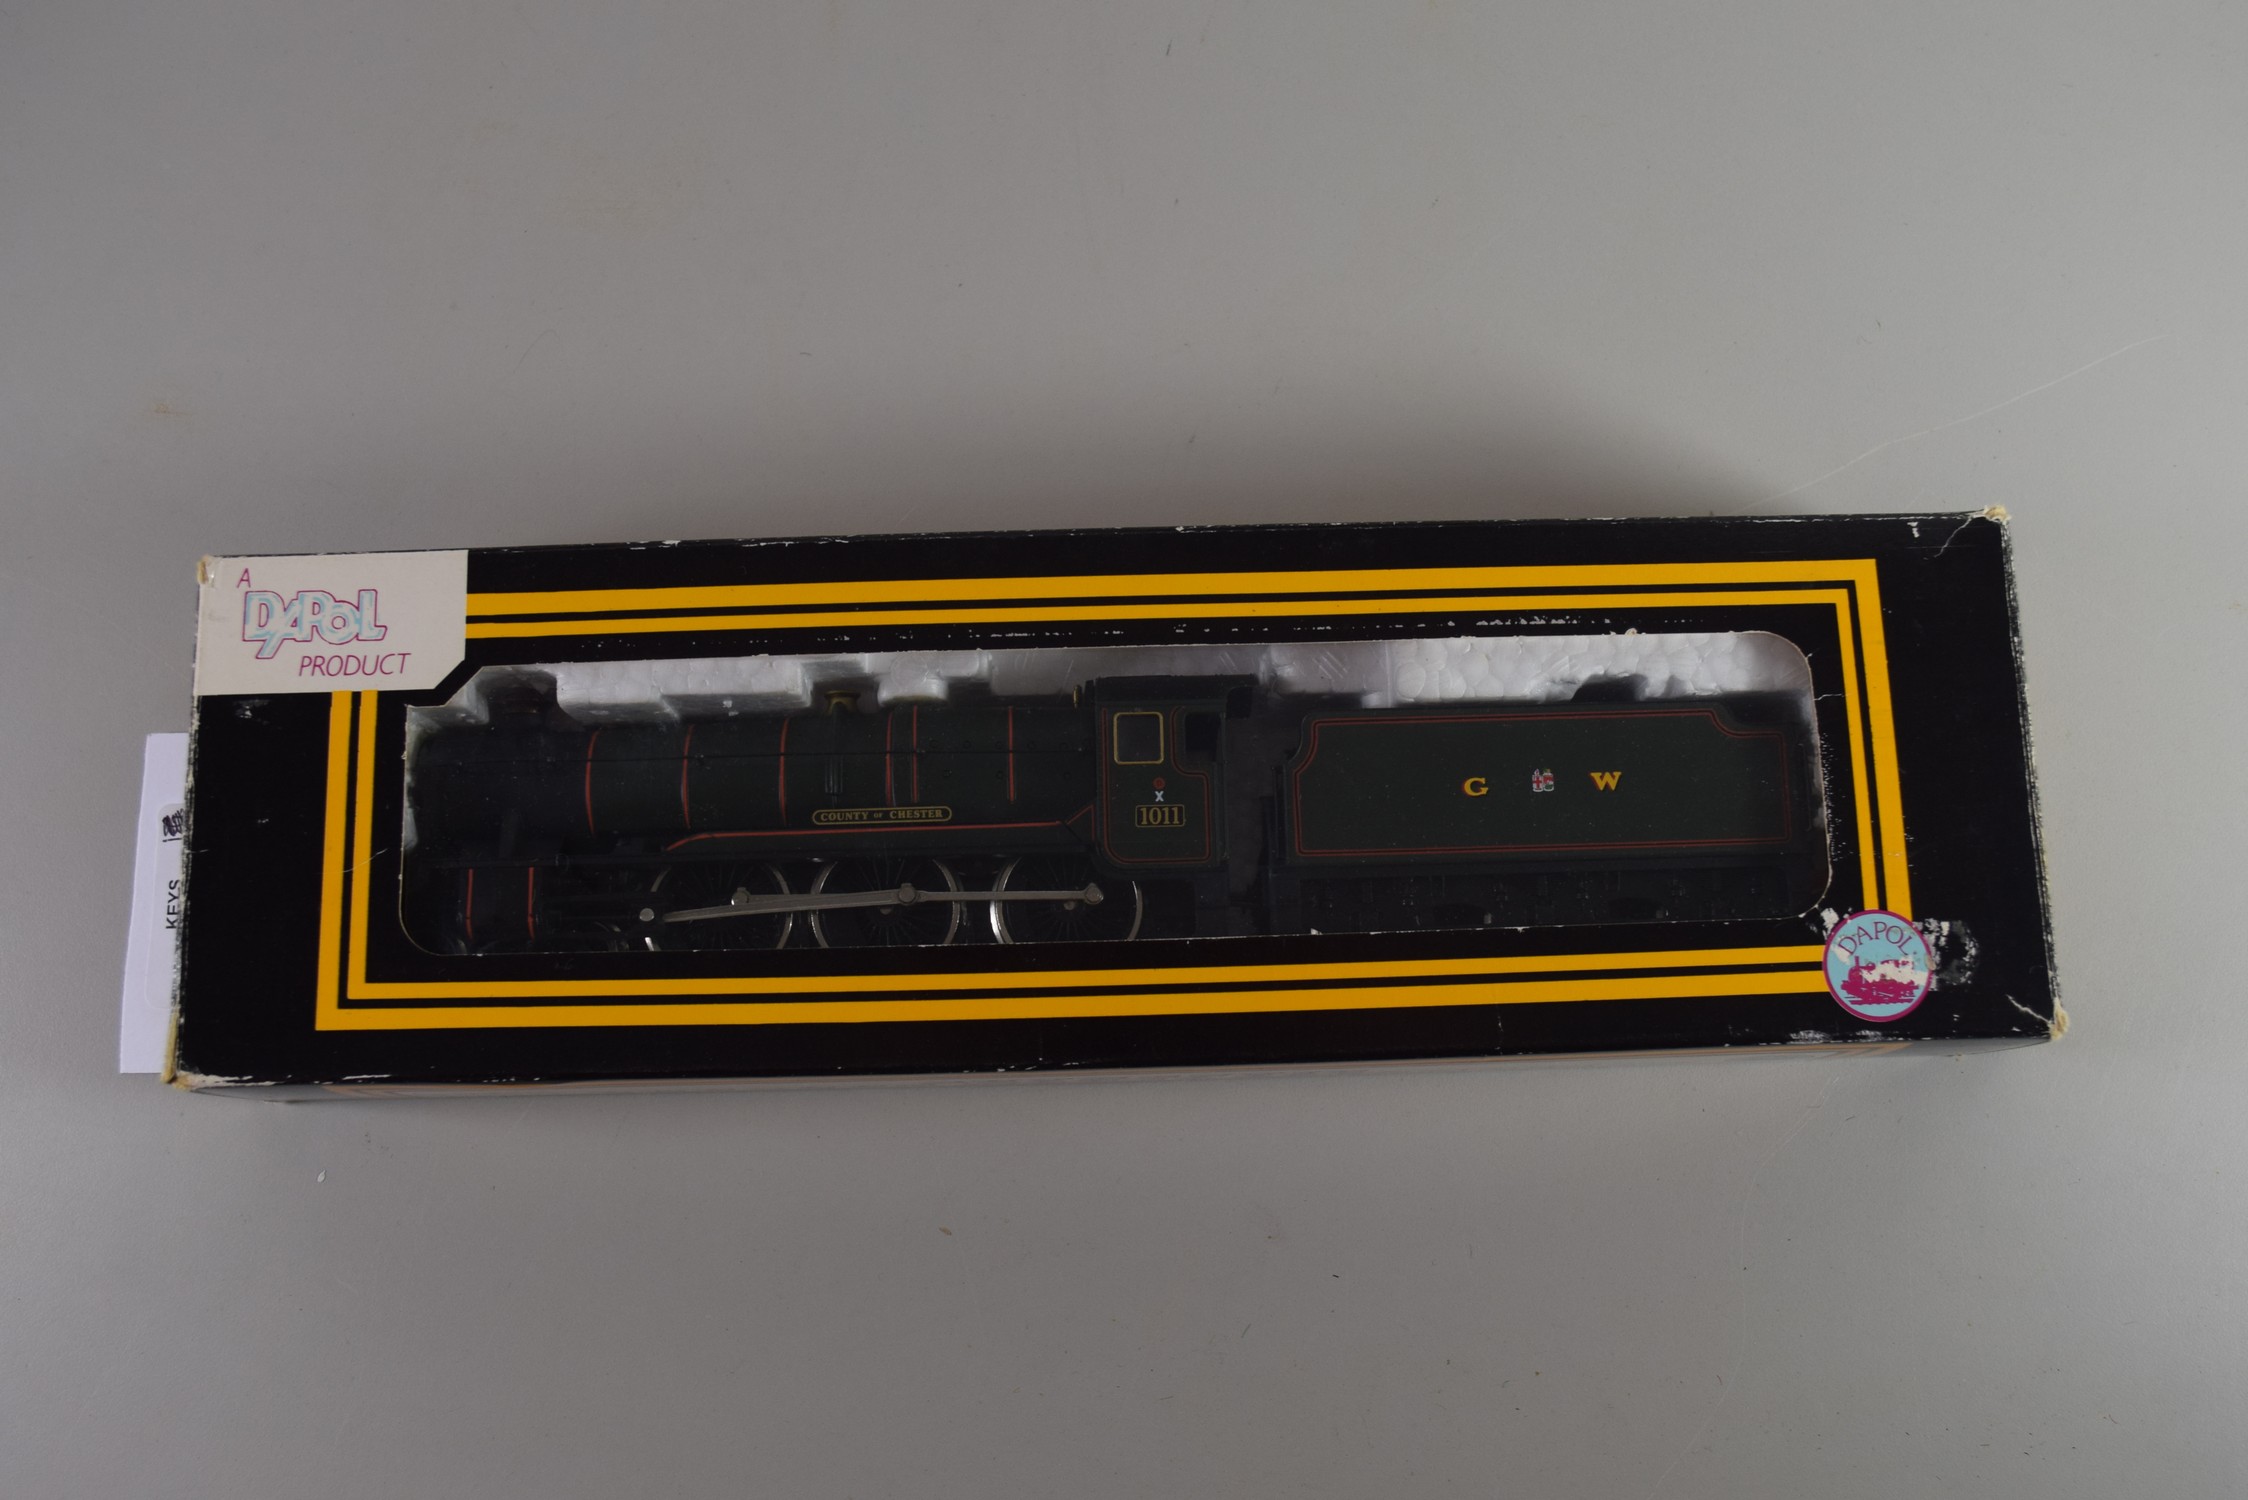 Boxed Dapol "County of Chester" locomotive, No 1011